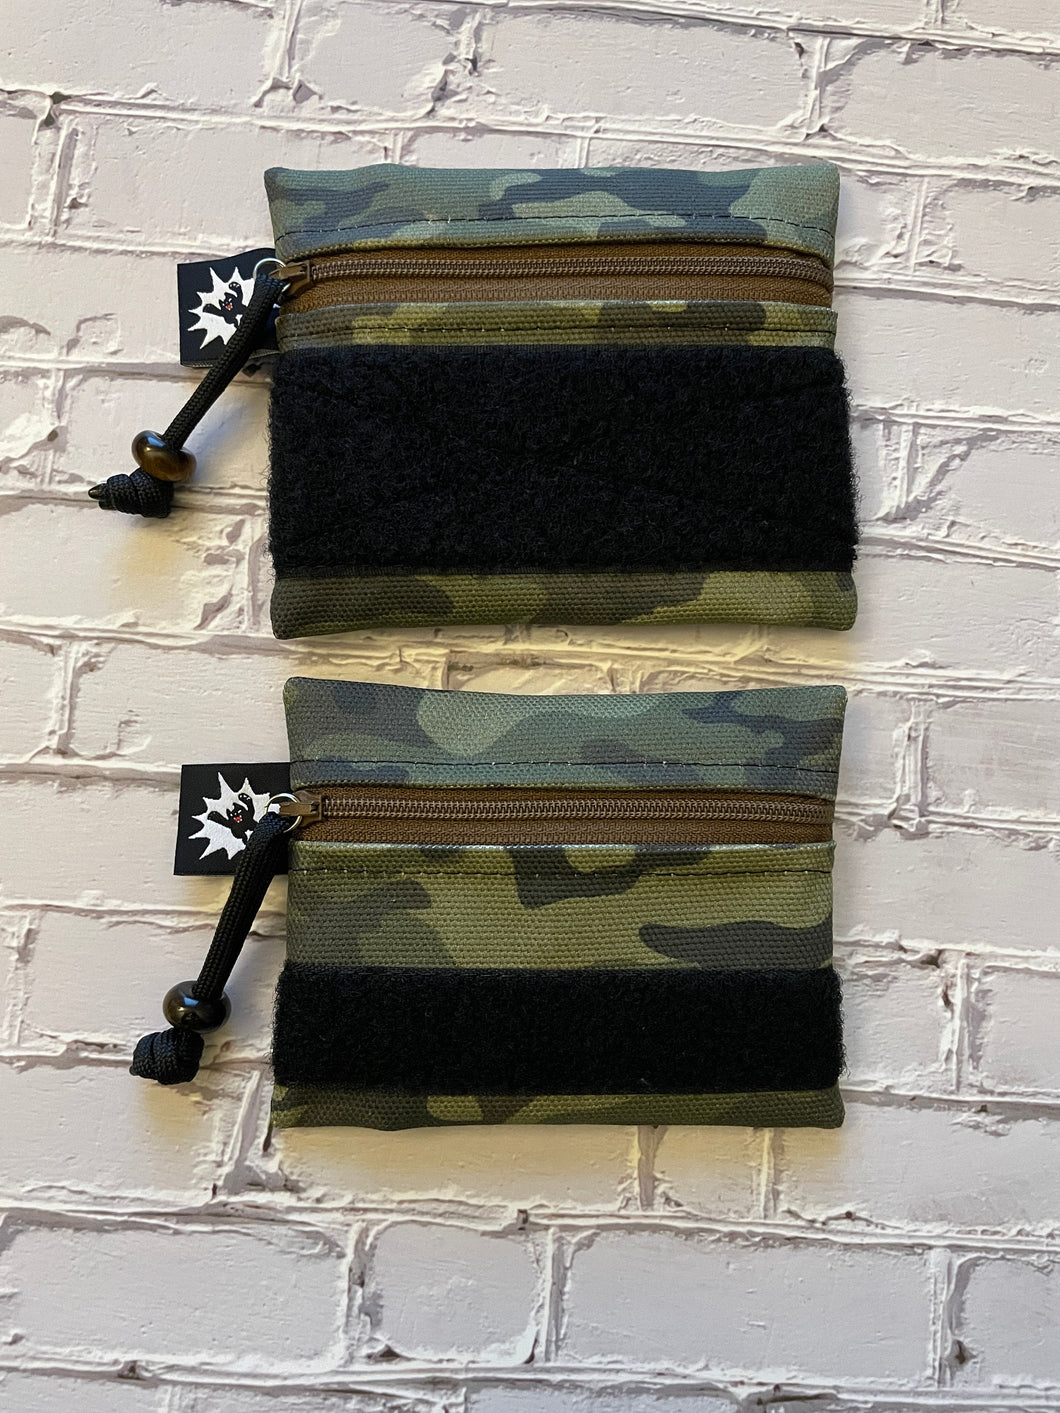 Waxed Canvas EDC Pouch | Mini Pouch | Small Zipper Wallet | Everyday Carry Bag | Hook and Loop Pouch | EDC Gear | Camo Canvas